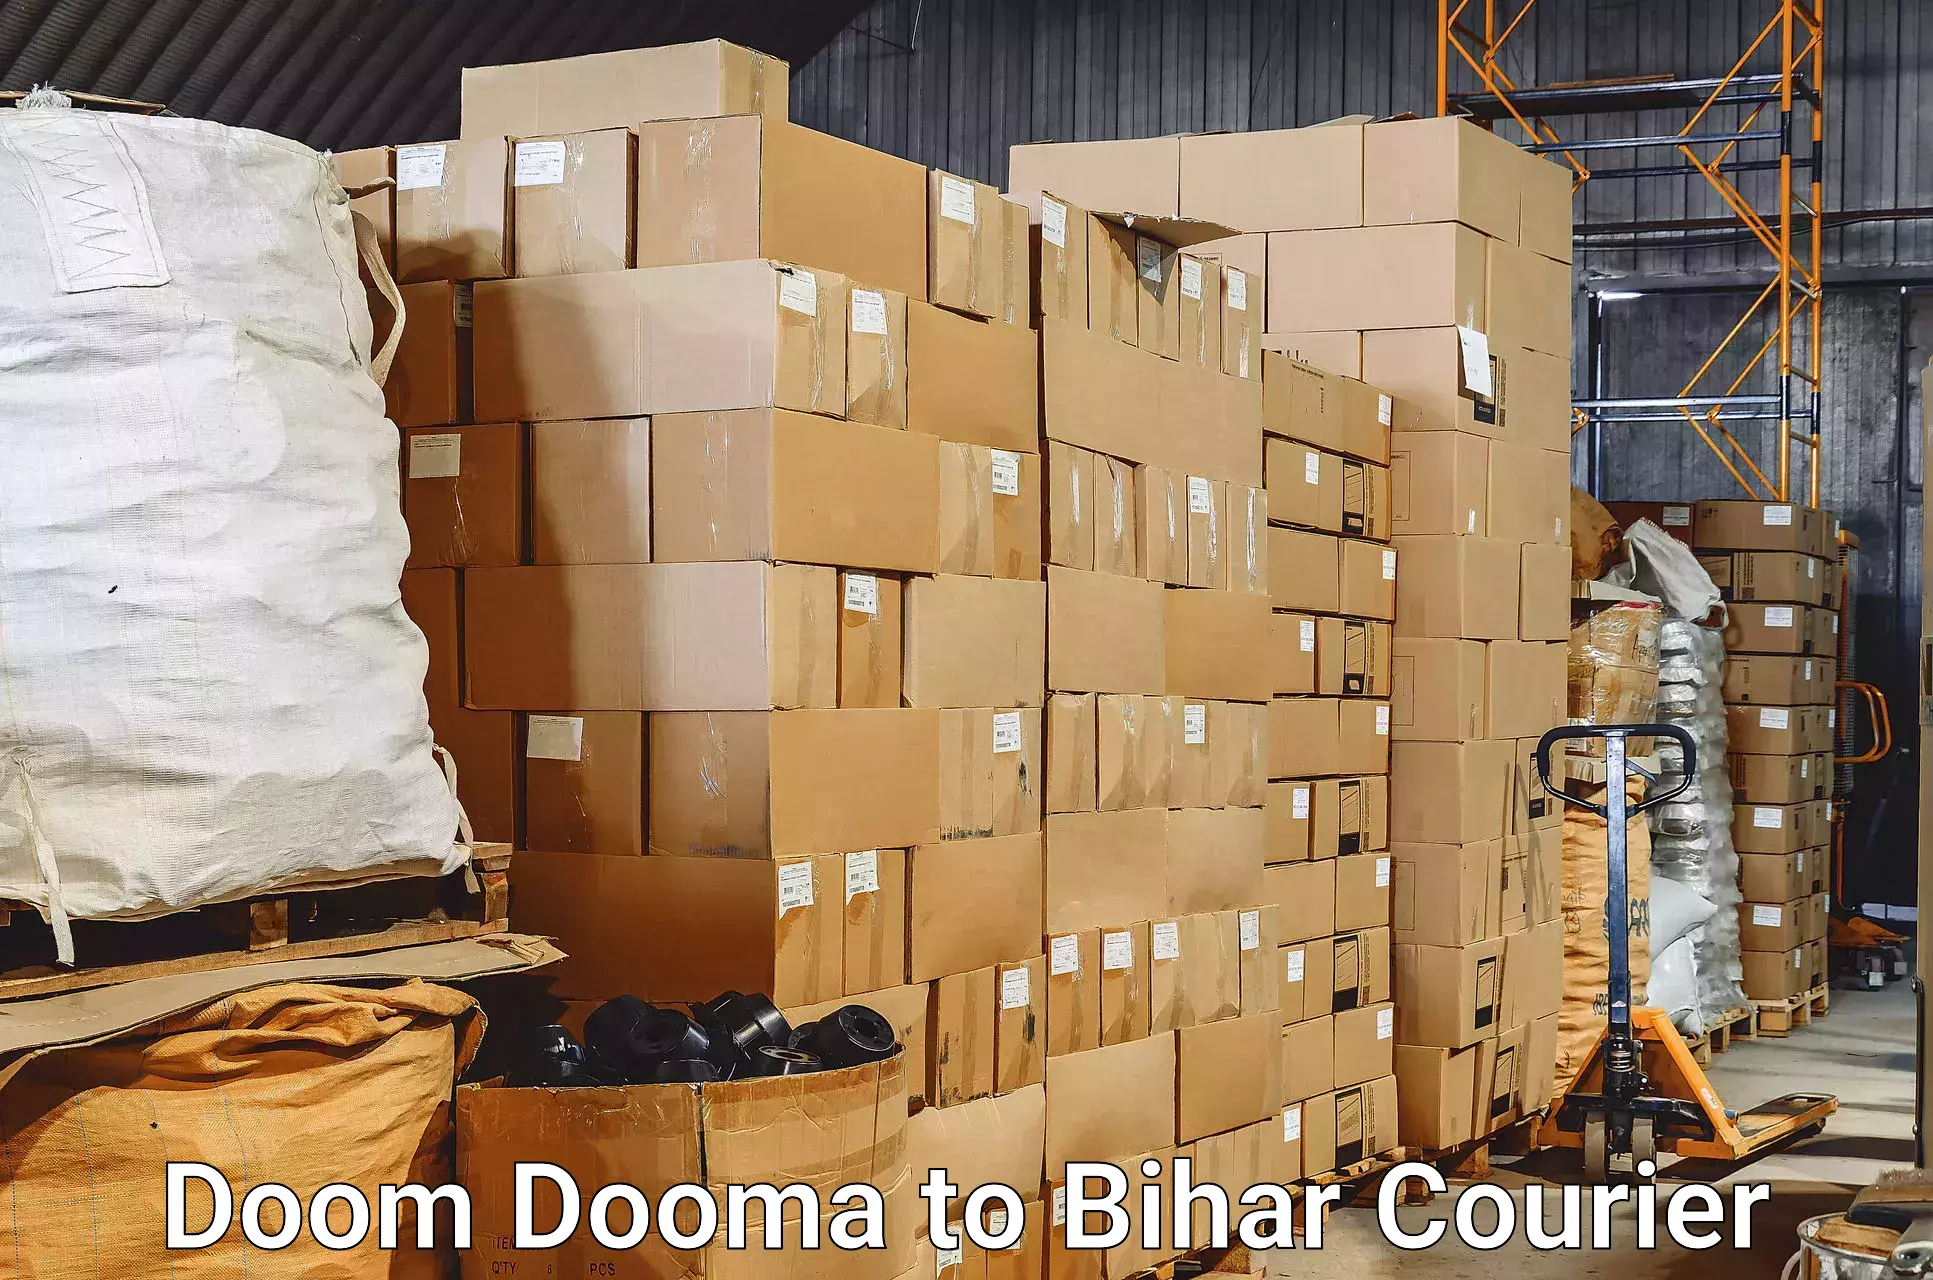 Express luggage delivery Doom Dooma to Rusera